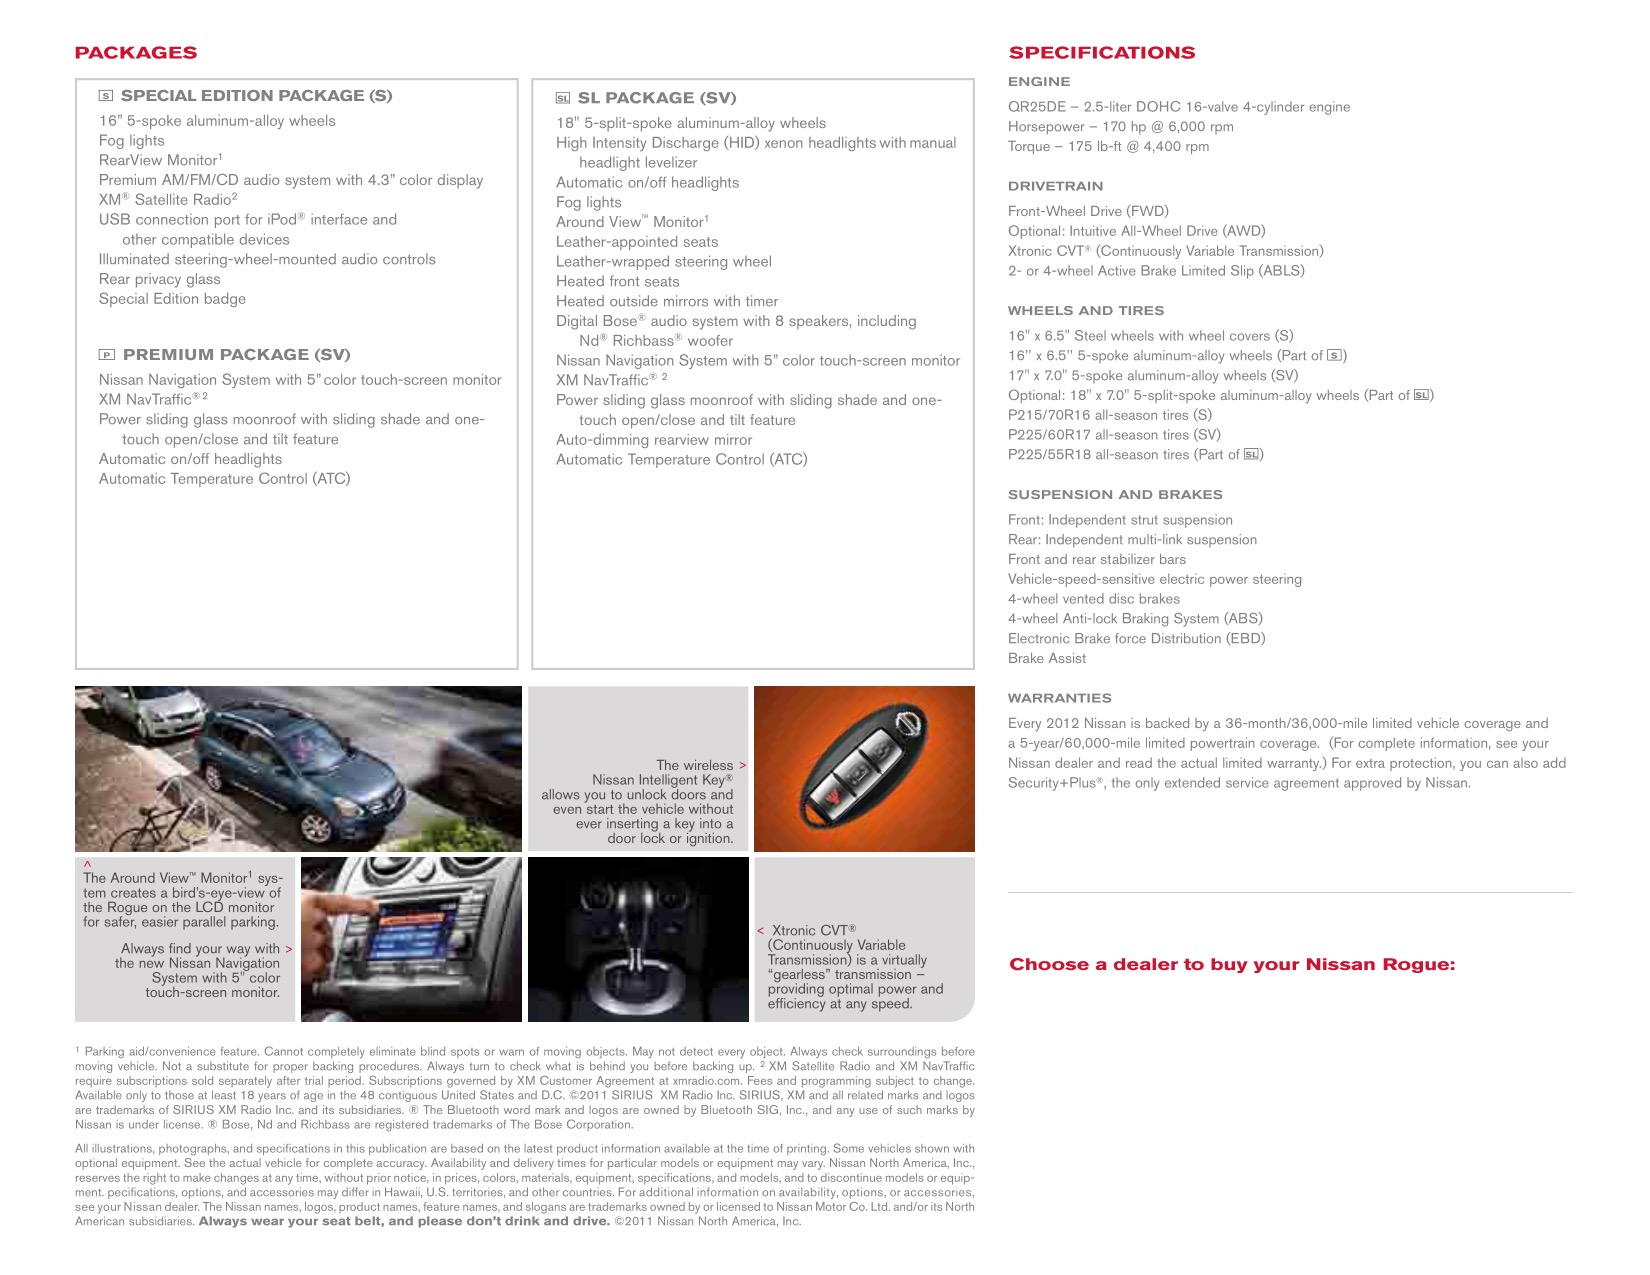 2012 Nissan Rogue Brochure Page 1